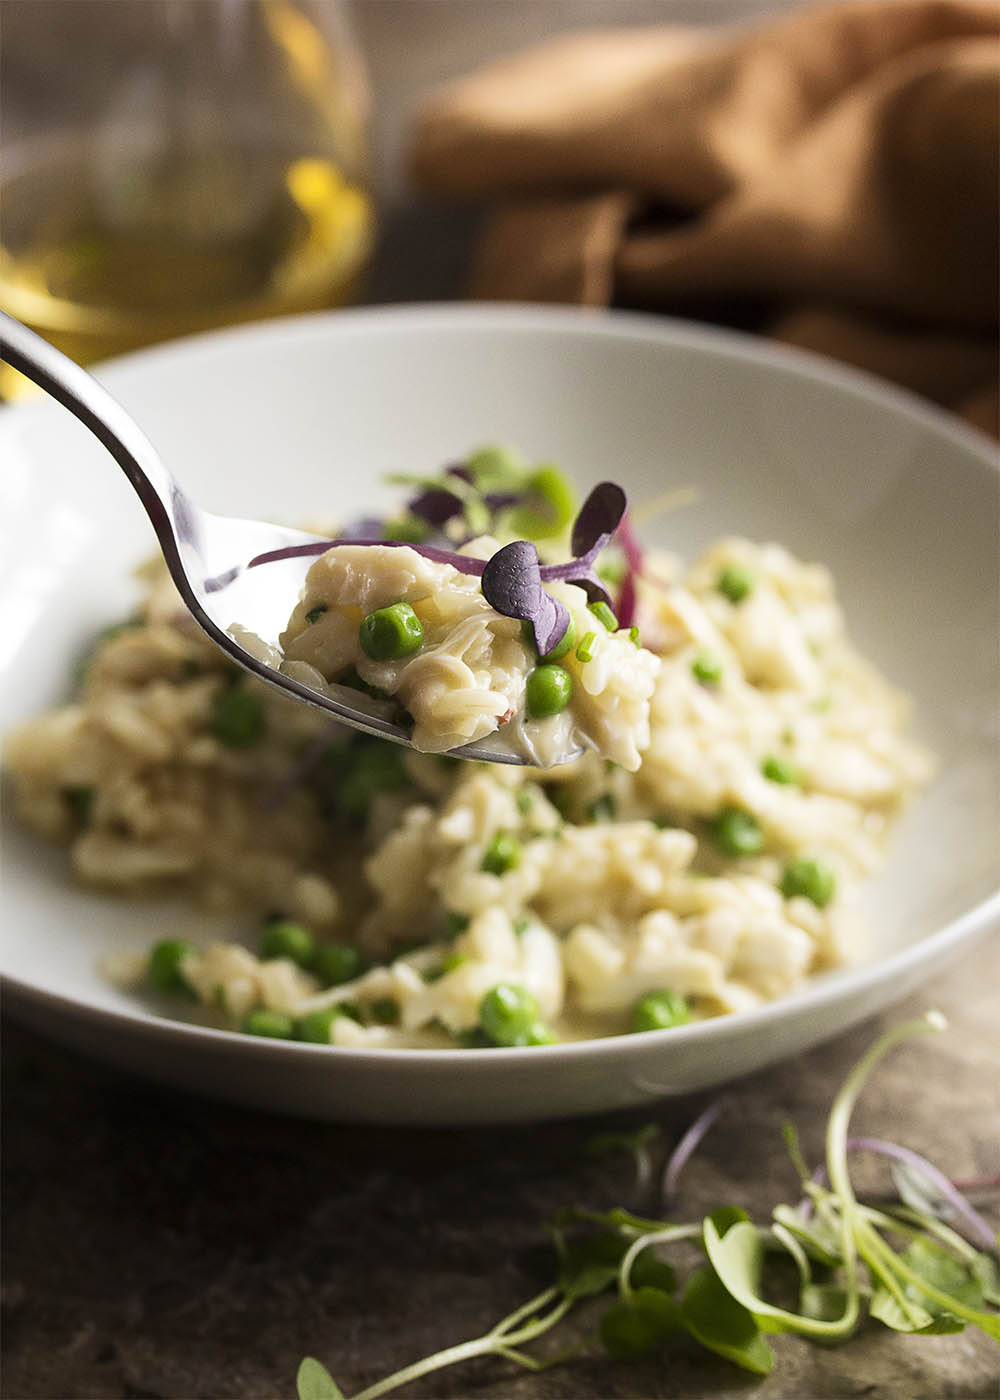 Creamy crab risotto makes a great one-pot meal! Sweet crab meat is mixed with mascarpone and baby peas in this quick dinner. Great for a weeknight or for date night. | justalittlebitofbacon.com